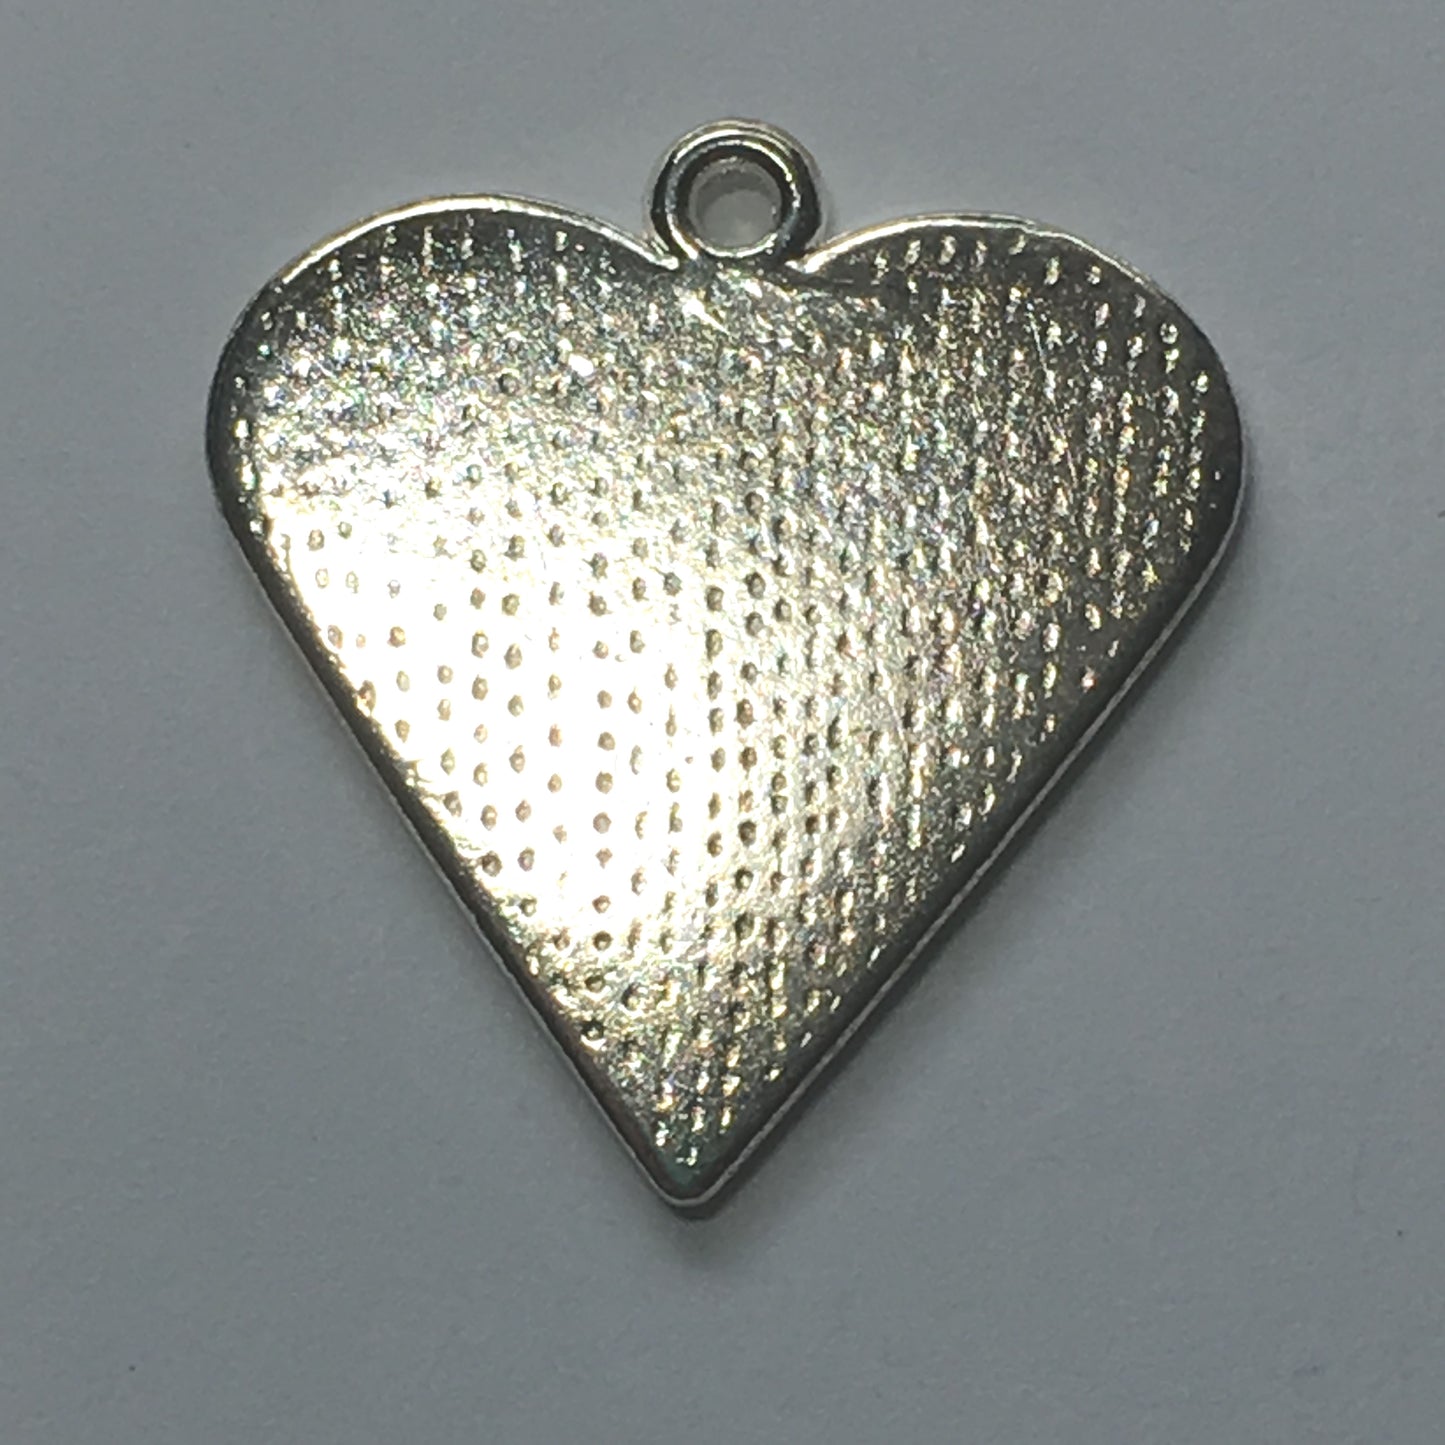 Bright Silver Plated Heart Charm/Pendant with Black Enamel Inlay Vine Design, 25 x 25 mm